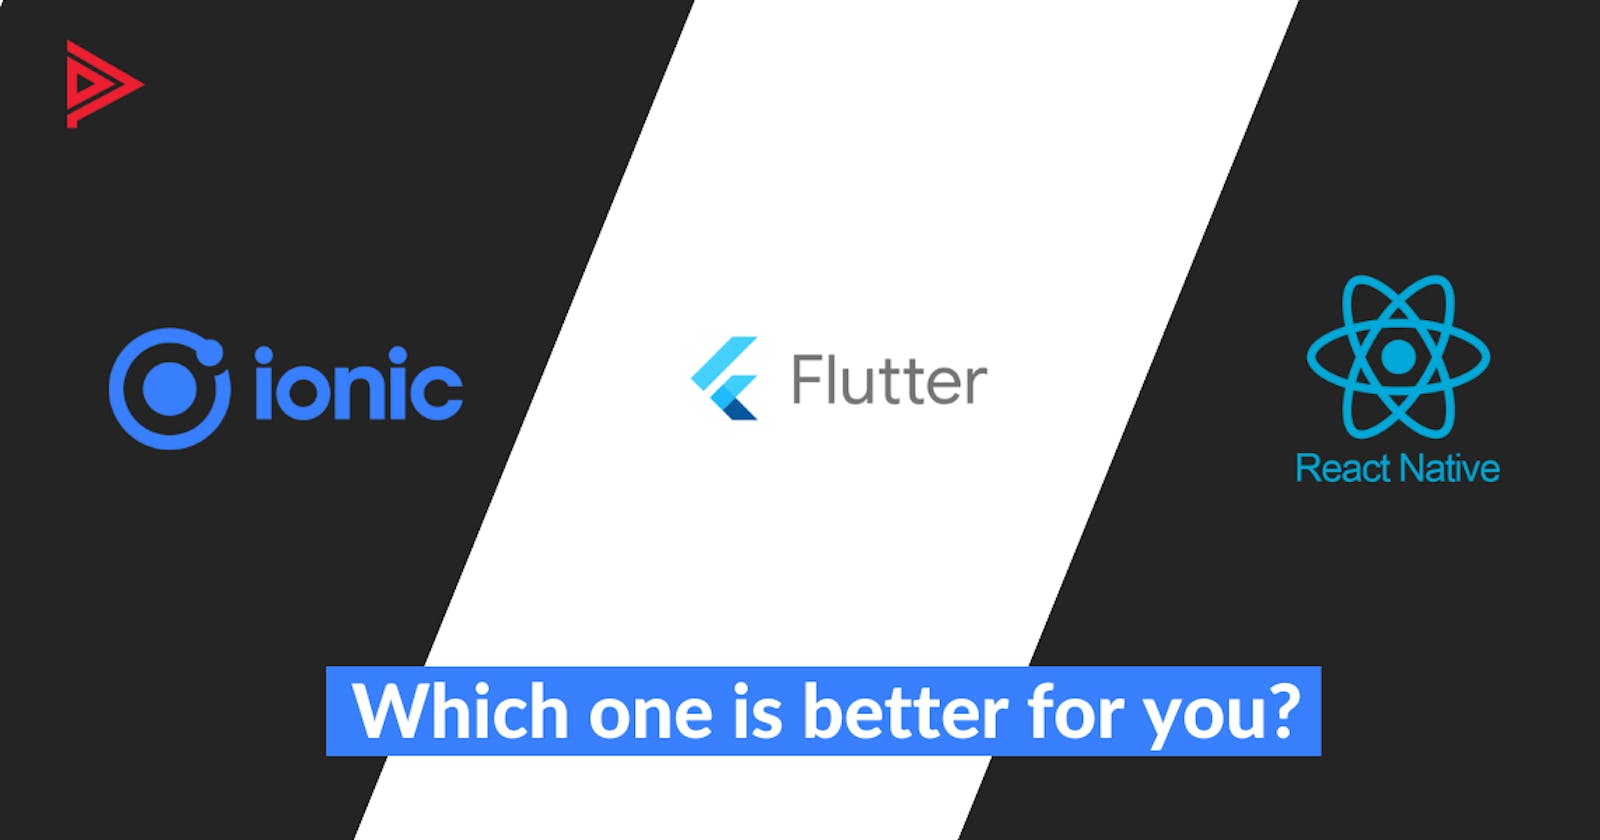 Ionic vs Flutter vs React Native: Which one is better for you